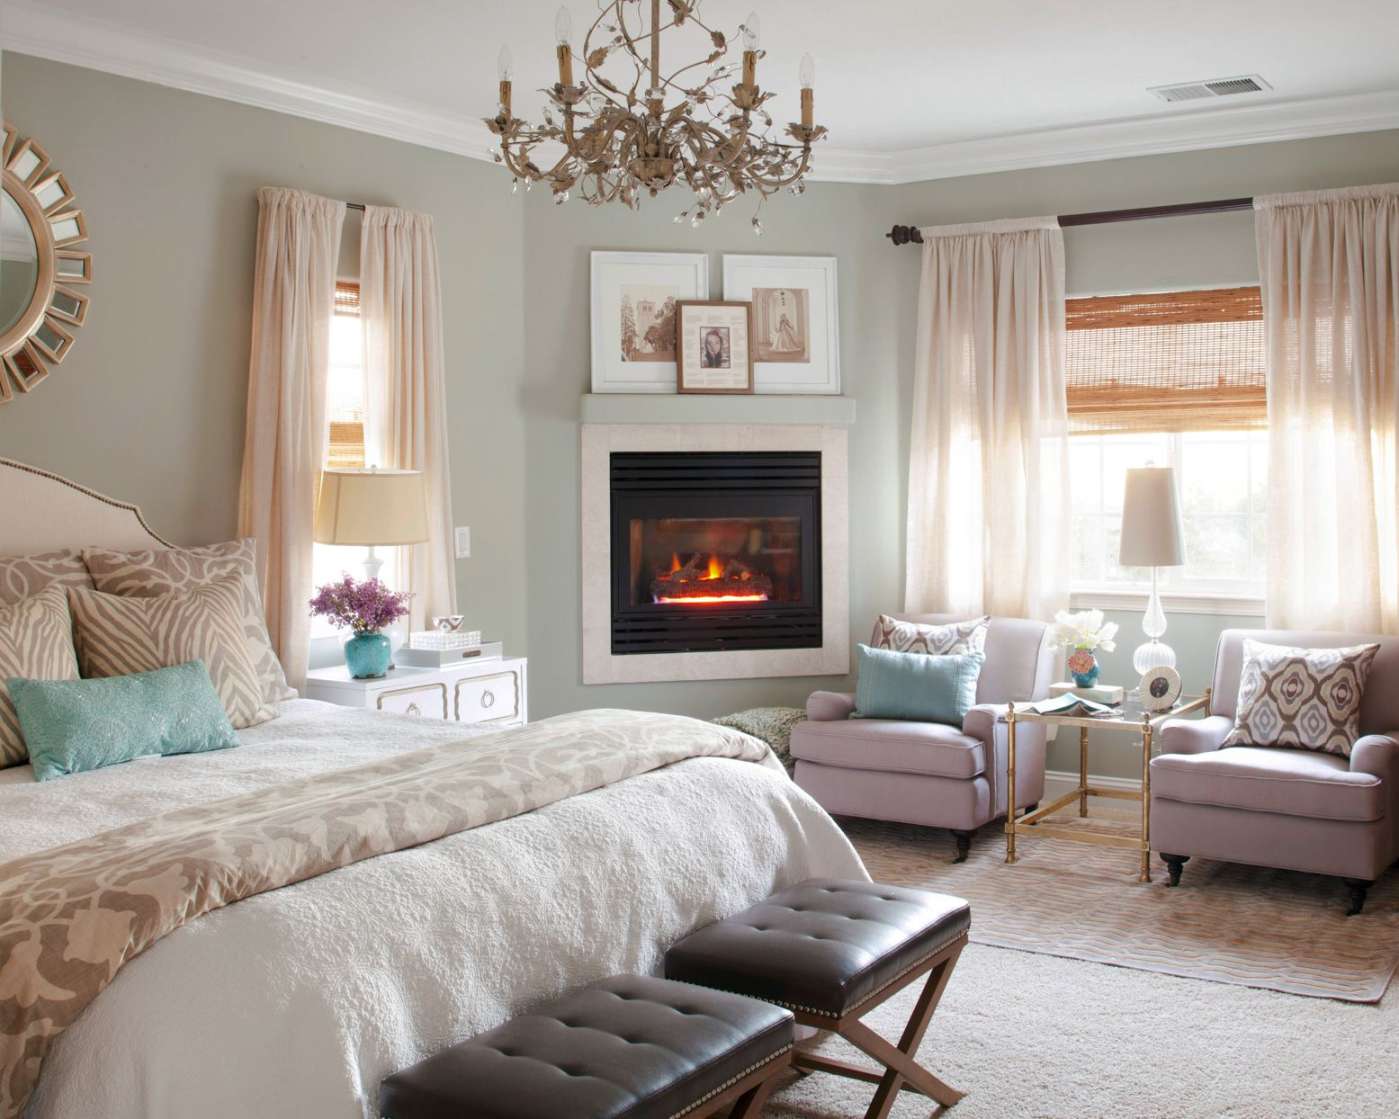 Bedroom Fireplace Ideas to Cozy Up Your Space